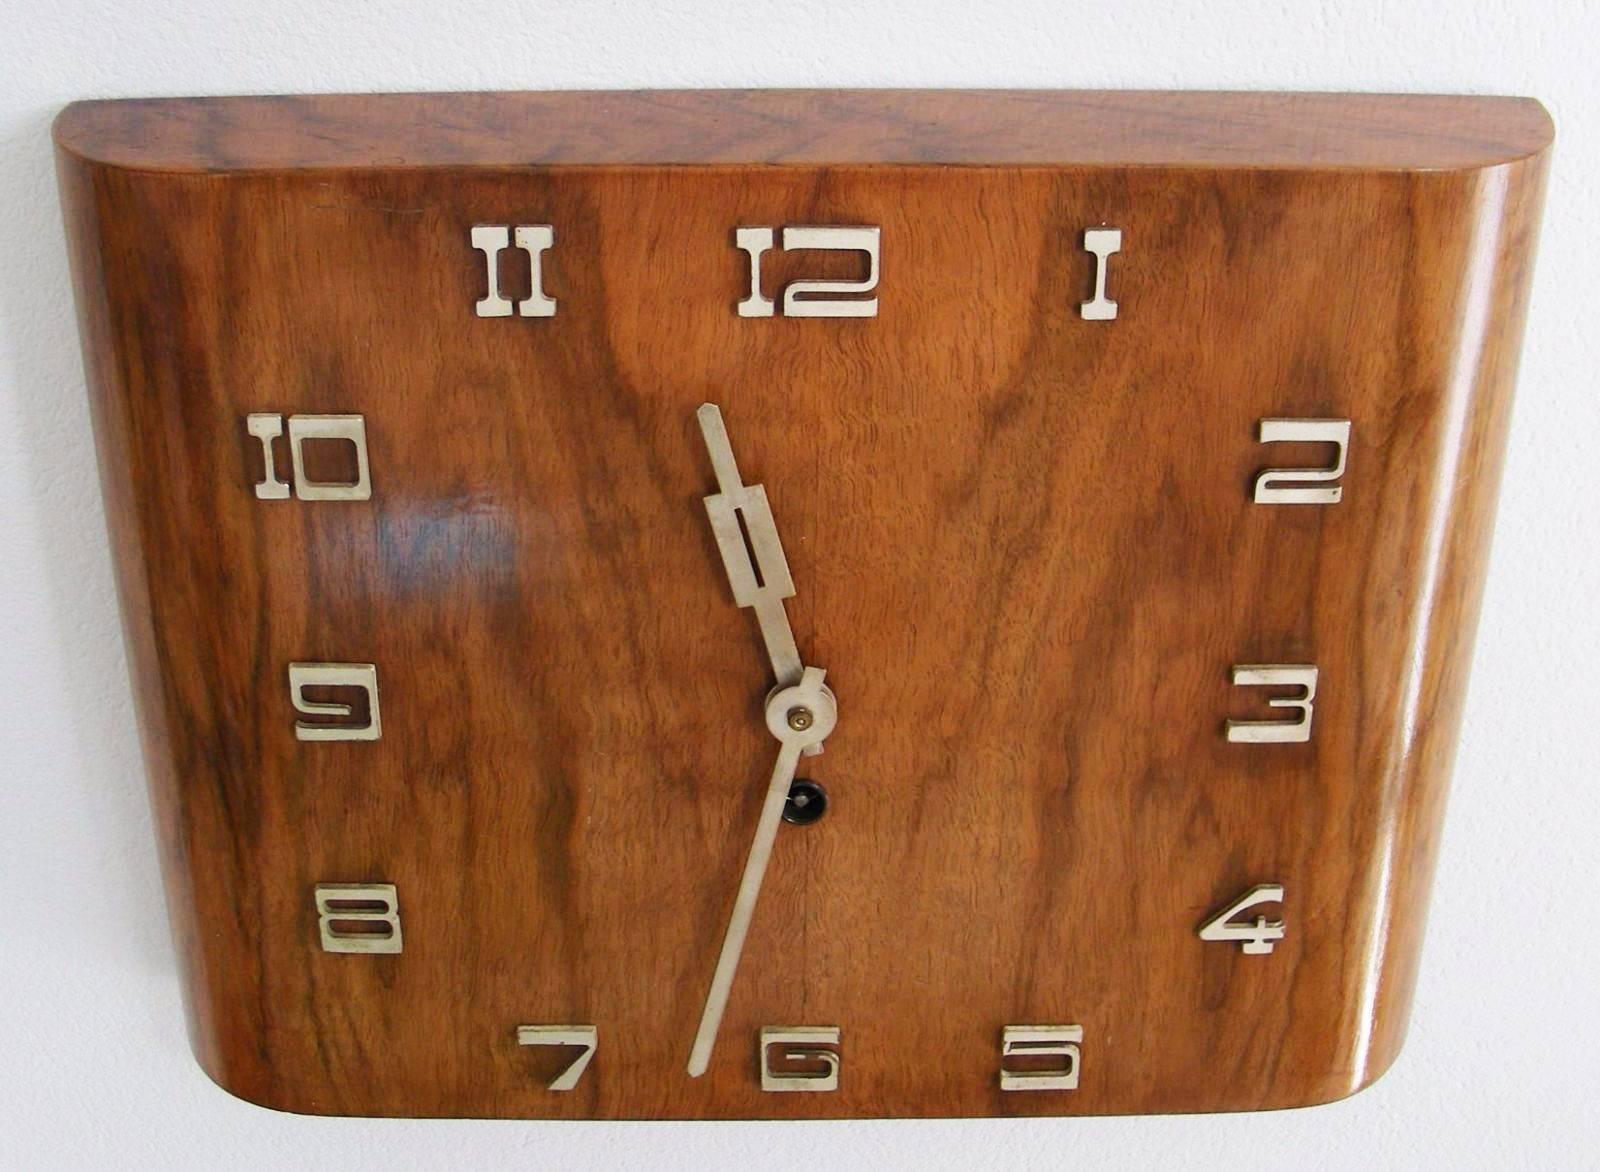 Art Deco Kienzle wall clock from about 1930's
walnut veneer and chrome letters
Signed on the back side 